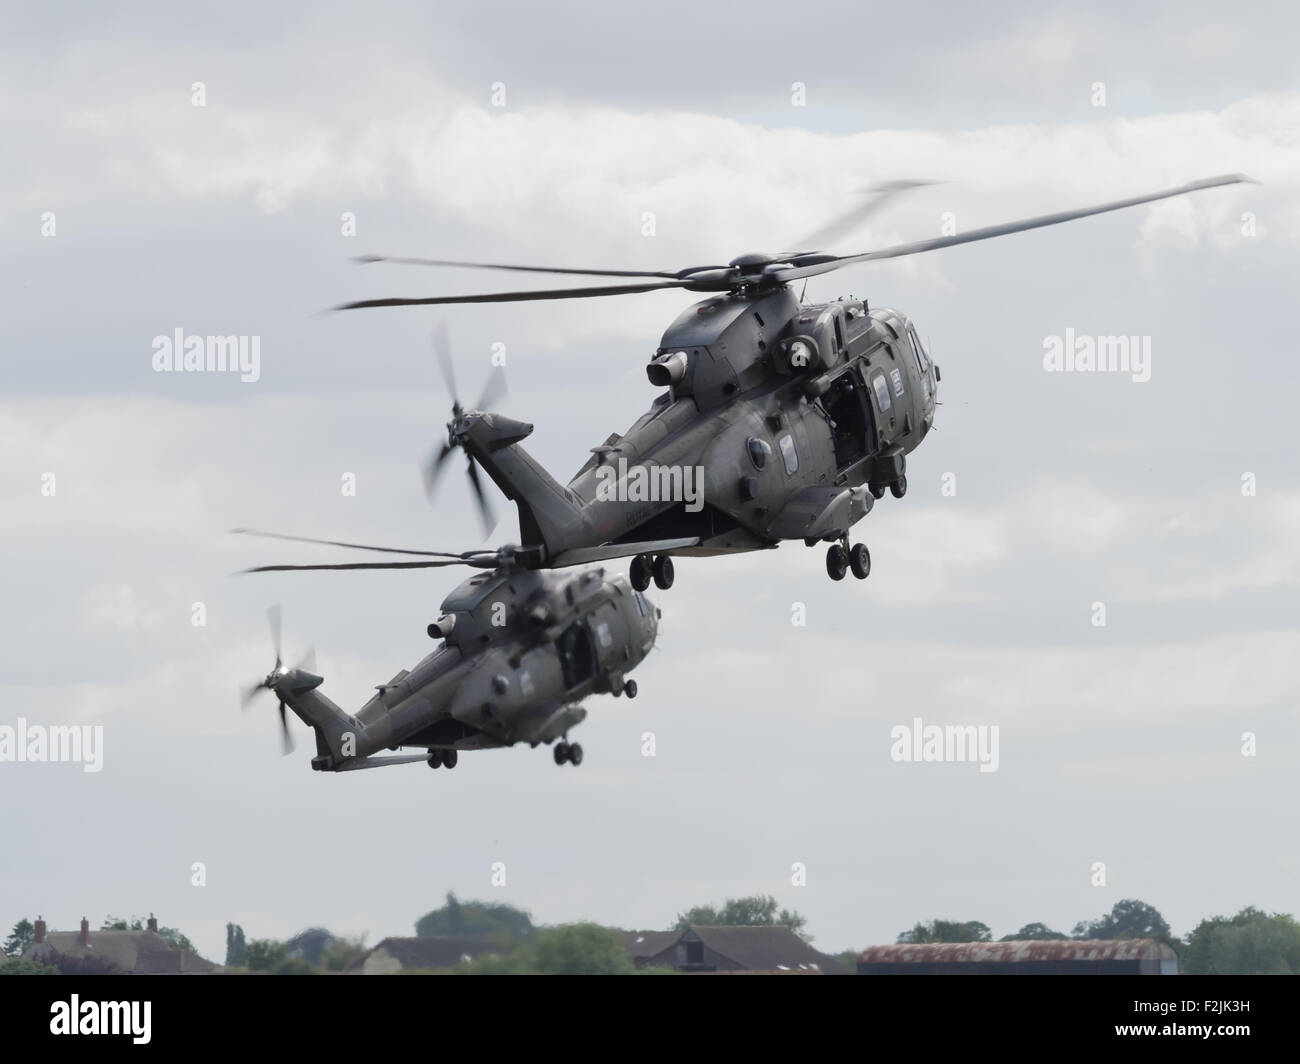 Yeovilton, UK - 11th July 2015: Royal Navy Merlin helicopters flying at Yeovilton Air Day. Stock Photo